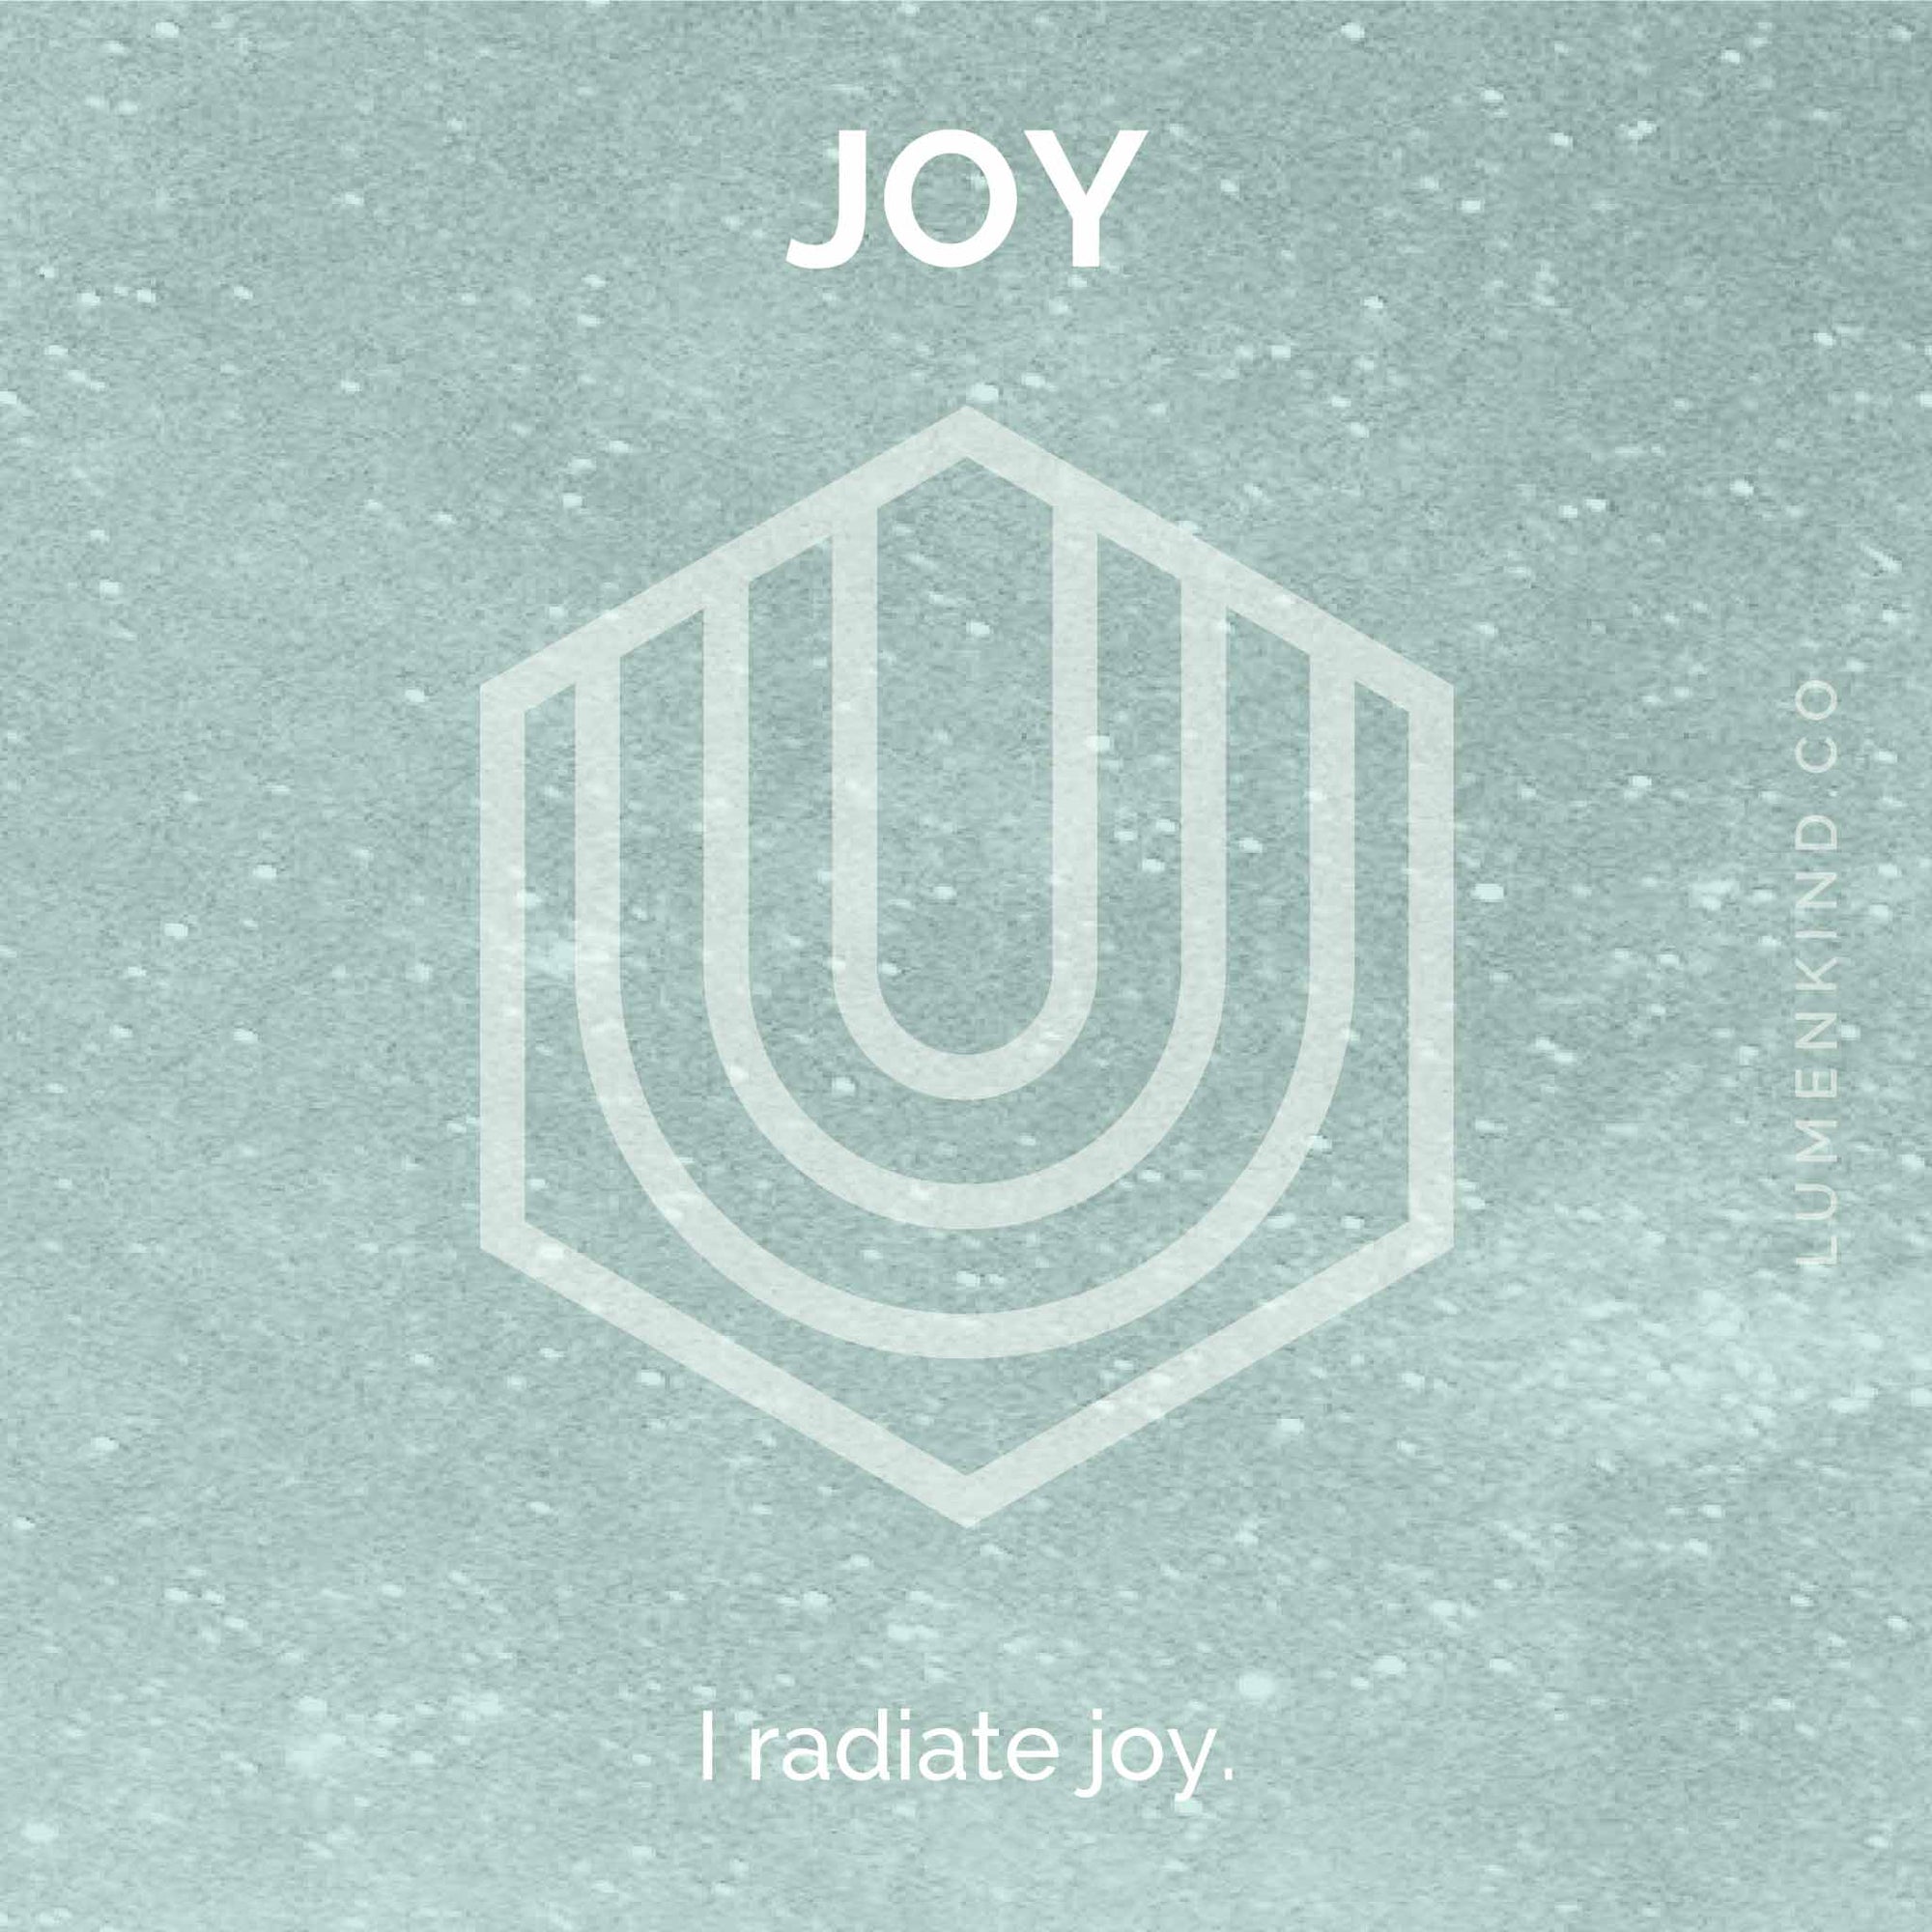 The suggested intention is JOY. I radiate joy.